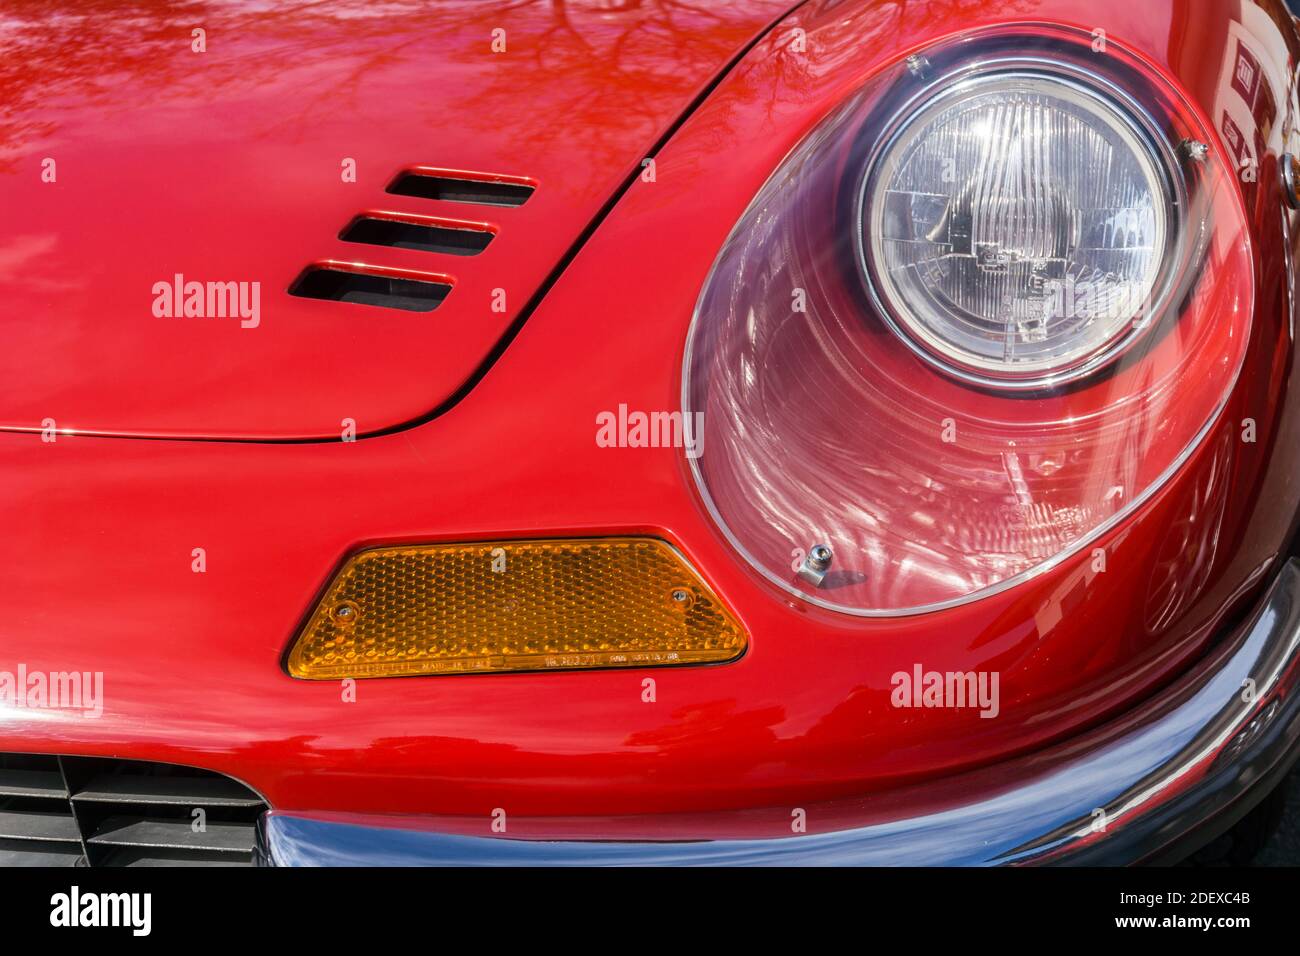 Close up detail of the headlight and bonnet on a red 1970s Ferrari Dino 246 GT sports car Stock Photo